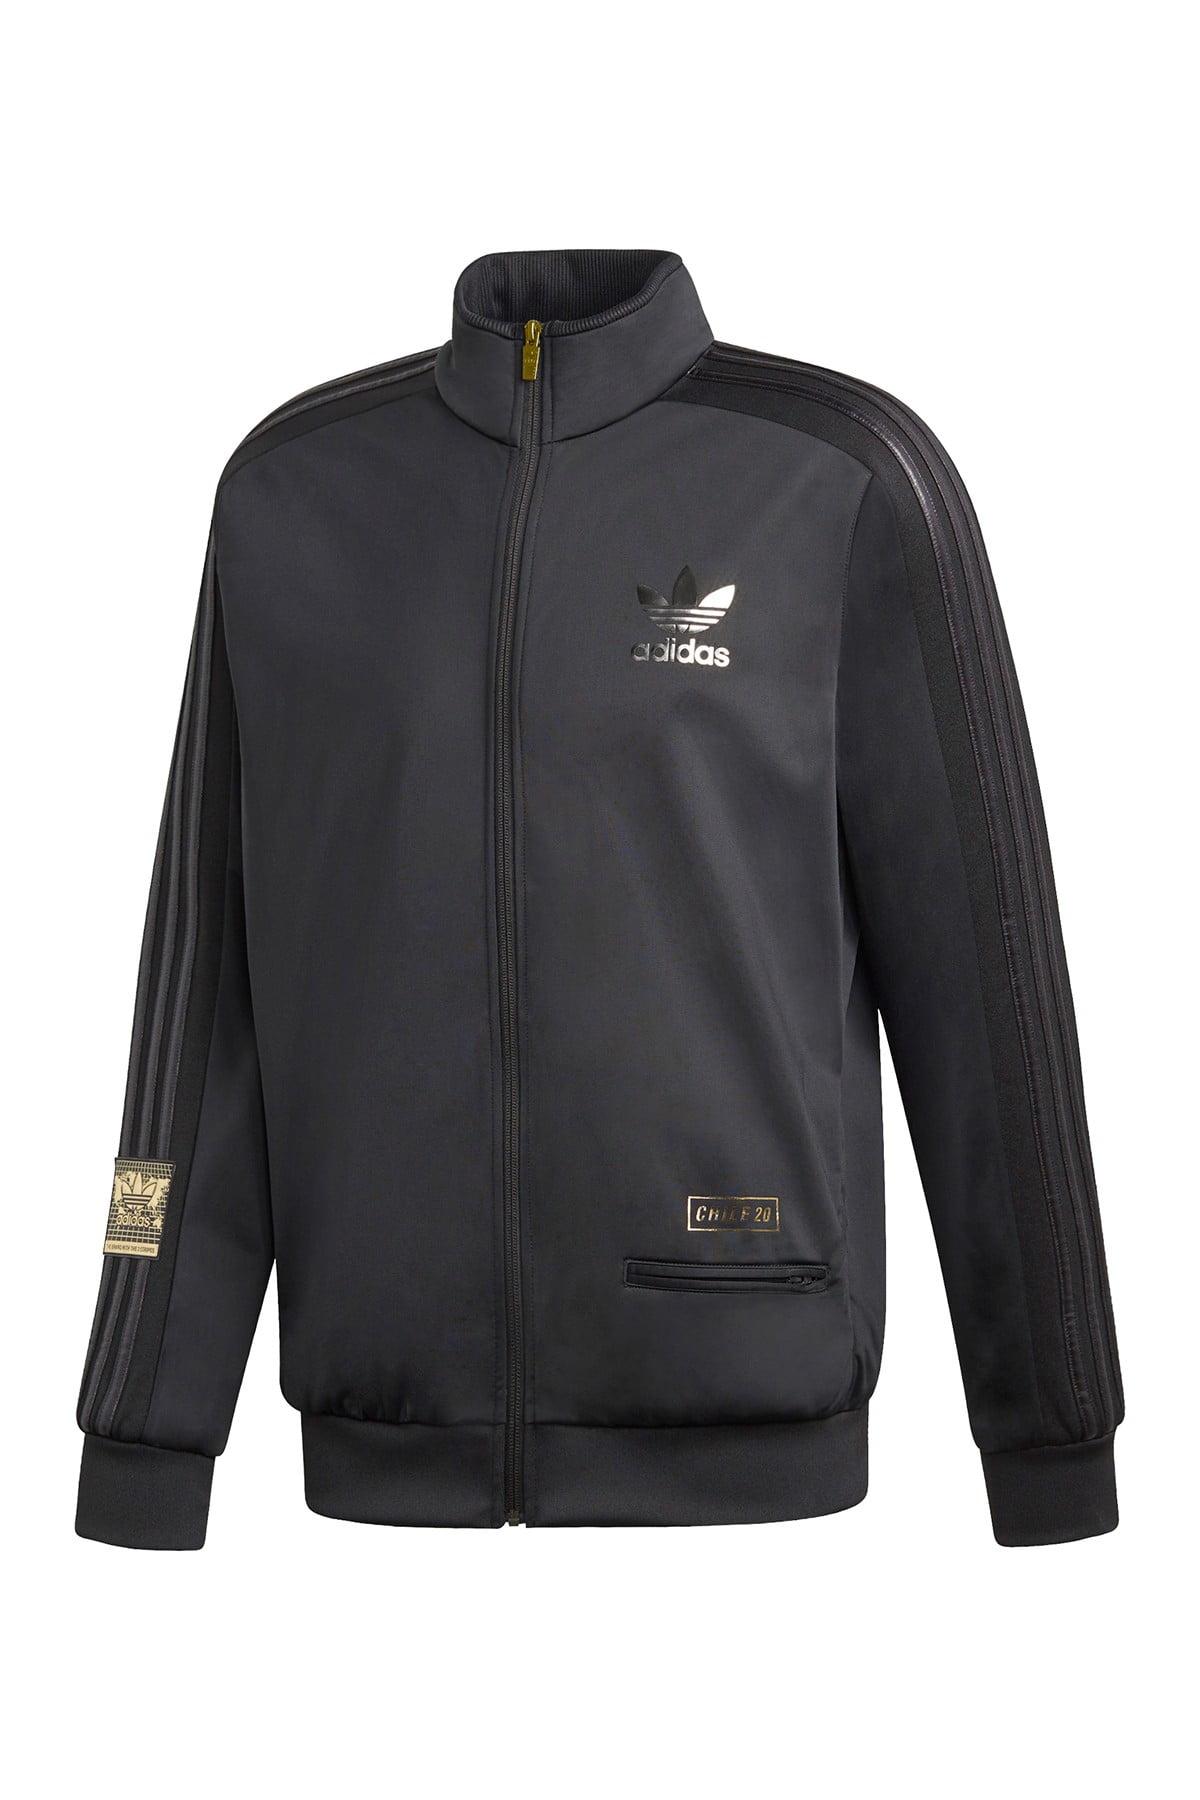 adidas Chile 20 Track Top in Black for Men - Lyst